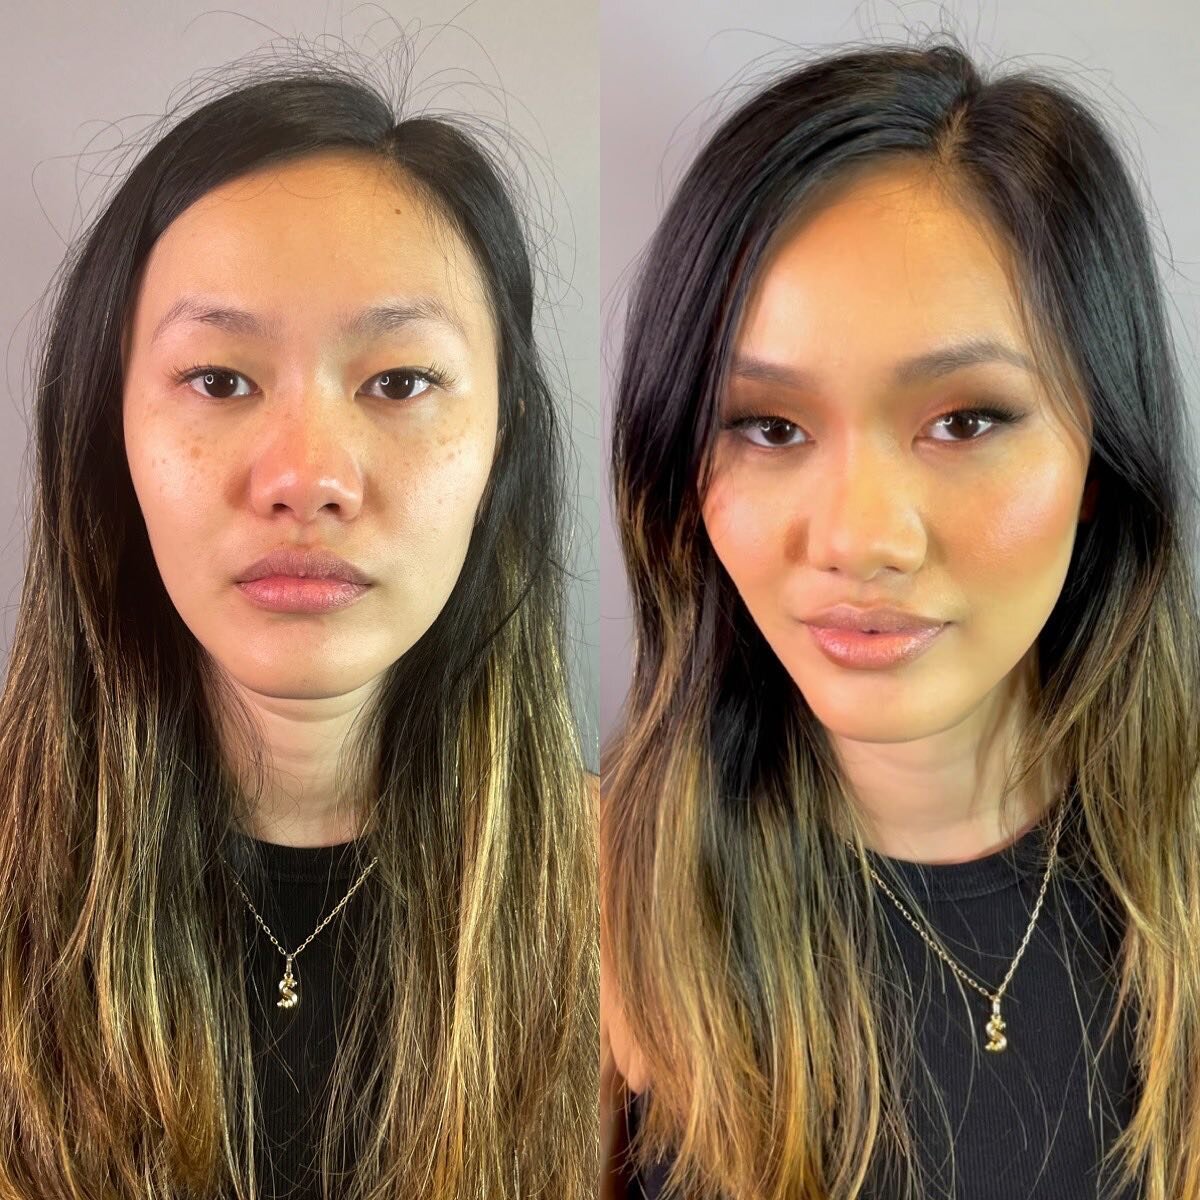 Soft wings and radiant, glowing skin ✨

Makeup by @kateashmanmakeup

Hit the Message button if you have an event you&rsquo;d like to chat about 😊

.
.

#melbournemakeupartist #beforeandafter #beforeandaftermakeup #editorialglam #editorialglammakeup 